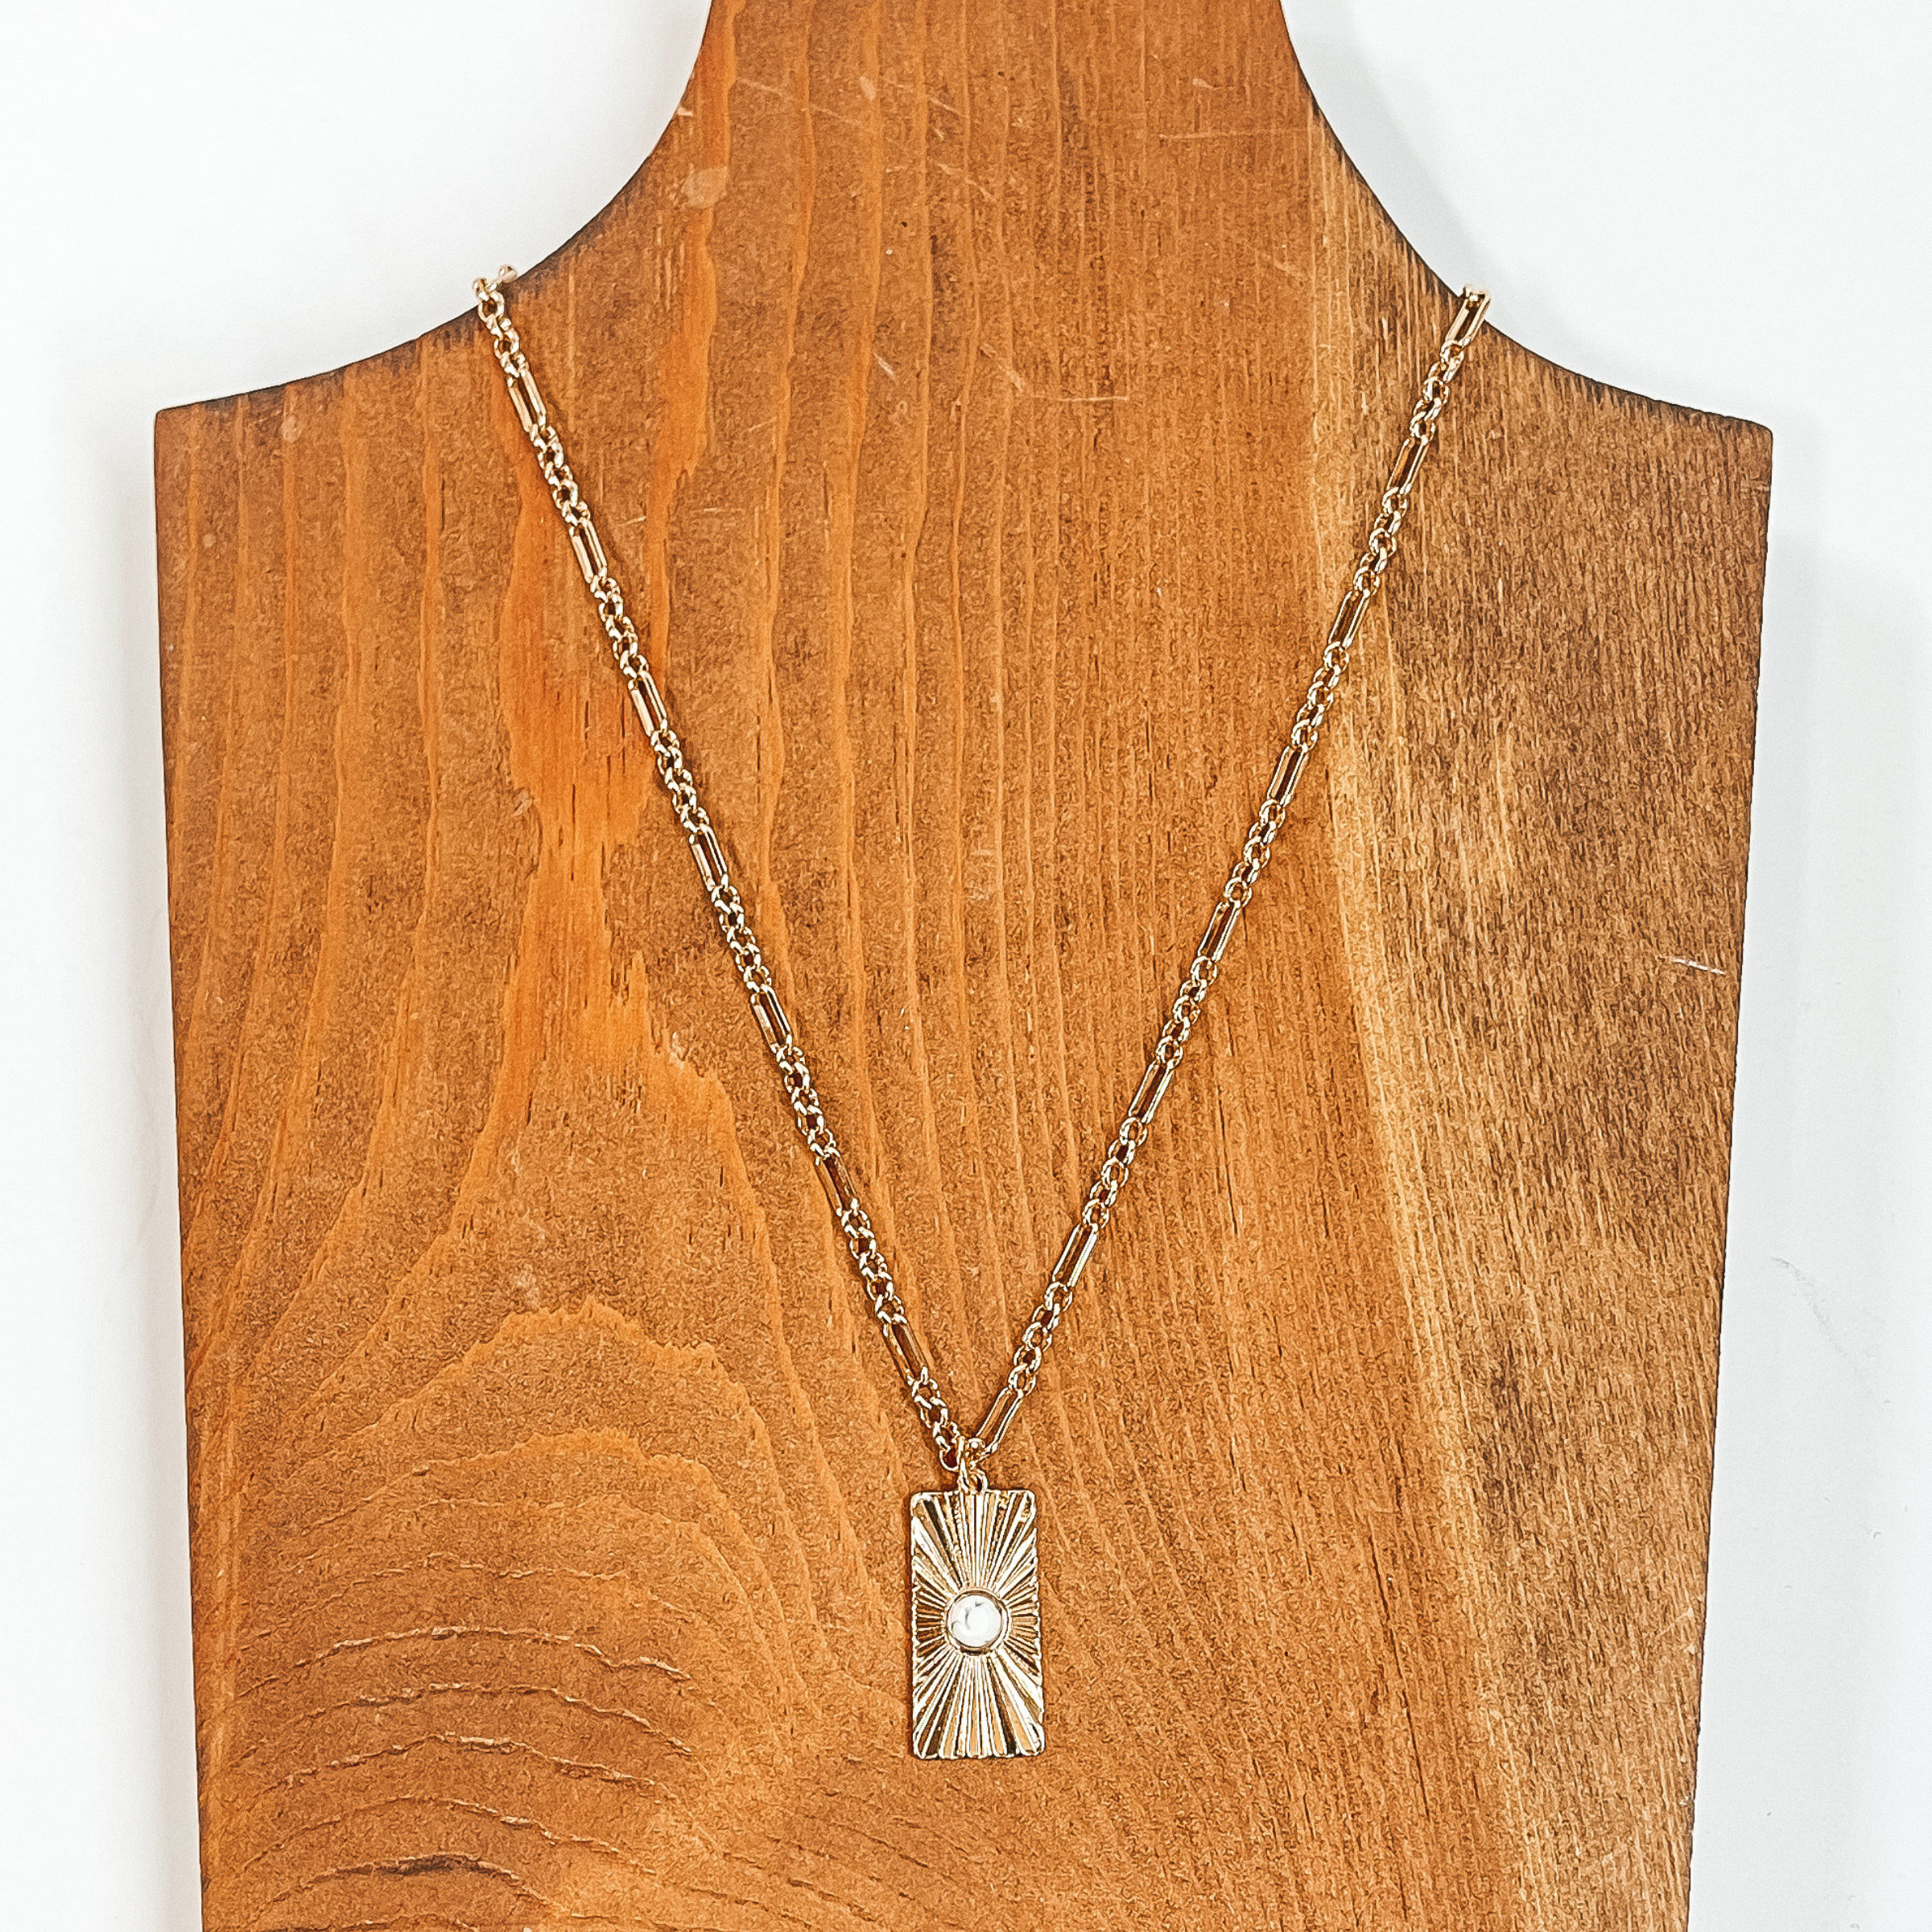 This is a gold chain necklace with a rectangle  pendant, the pendant has a sunburst texture and  a small stone in white. This necklace is taken on  a brown necklace board and a white background.